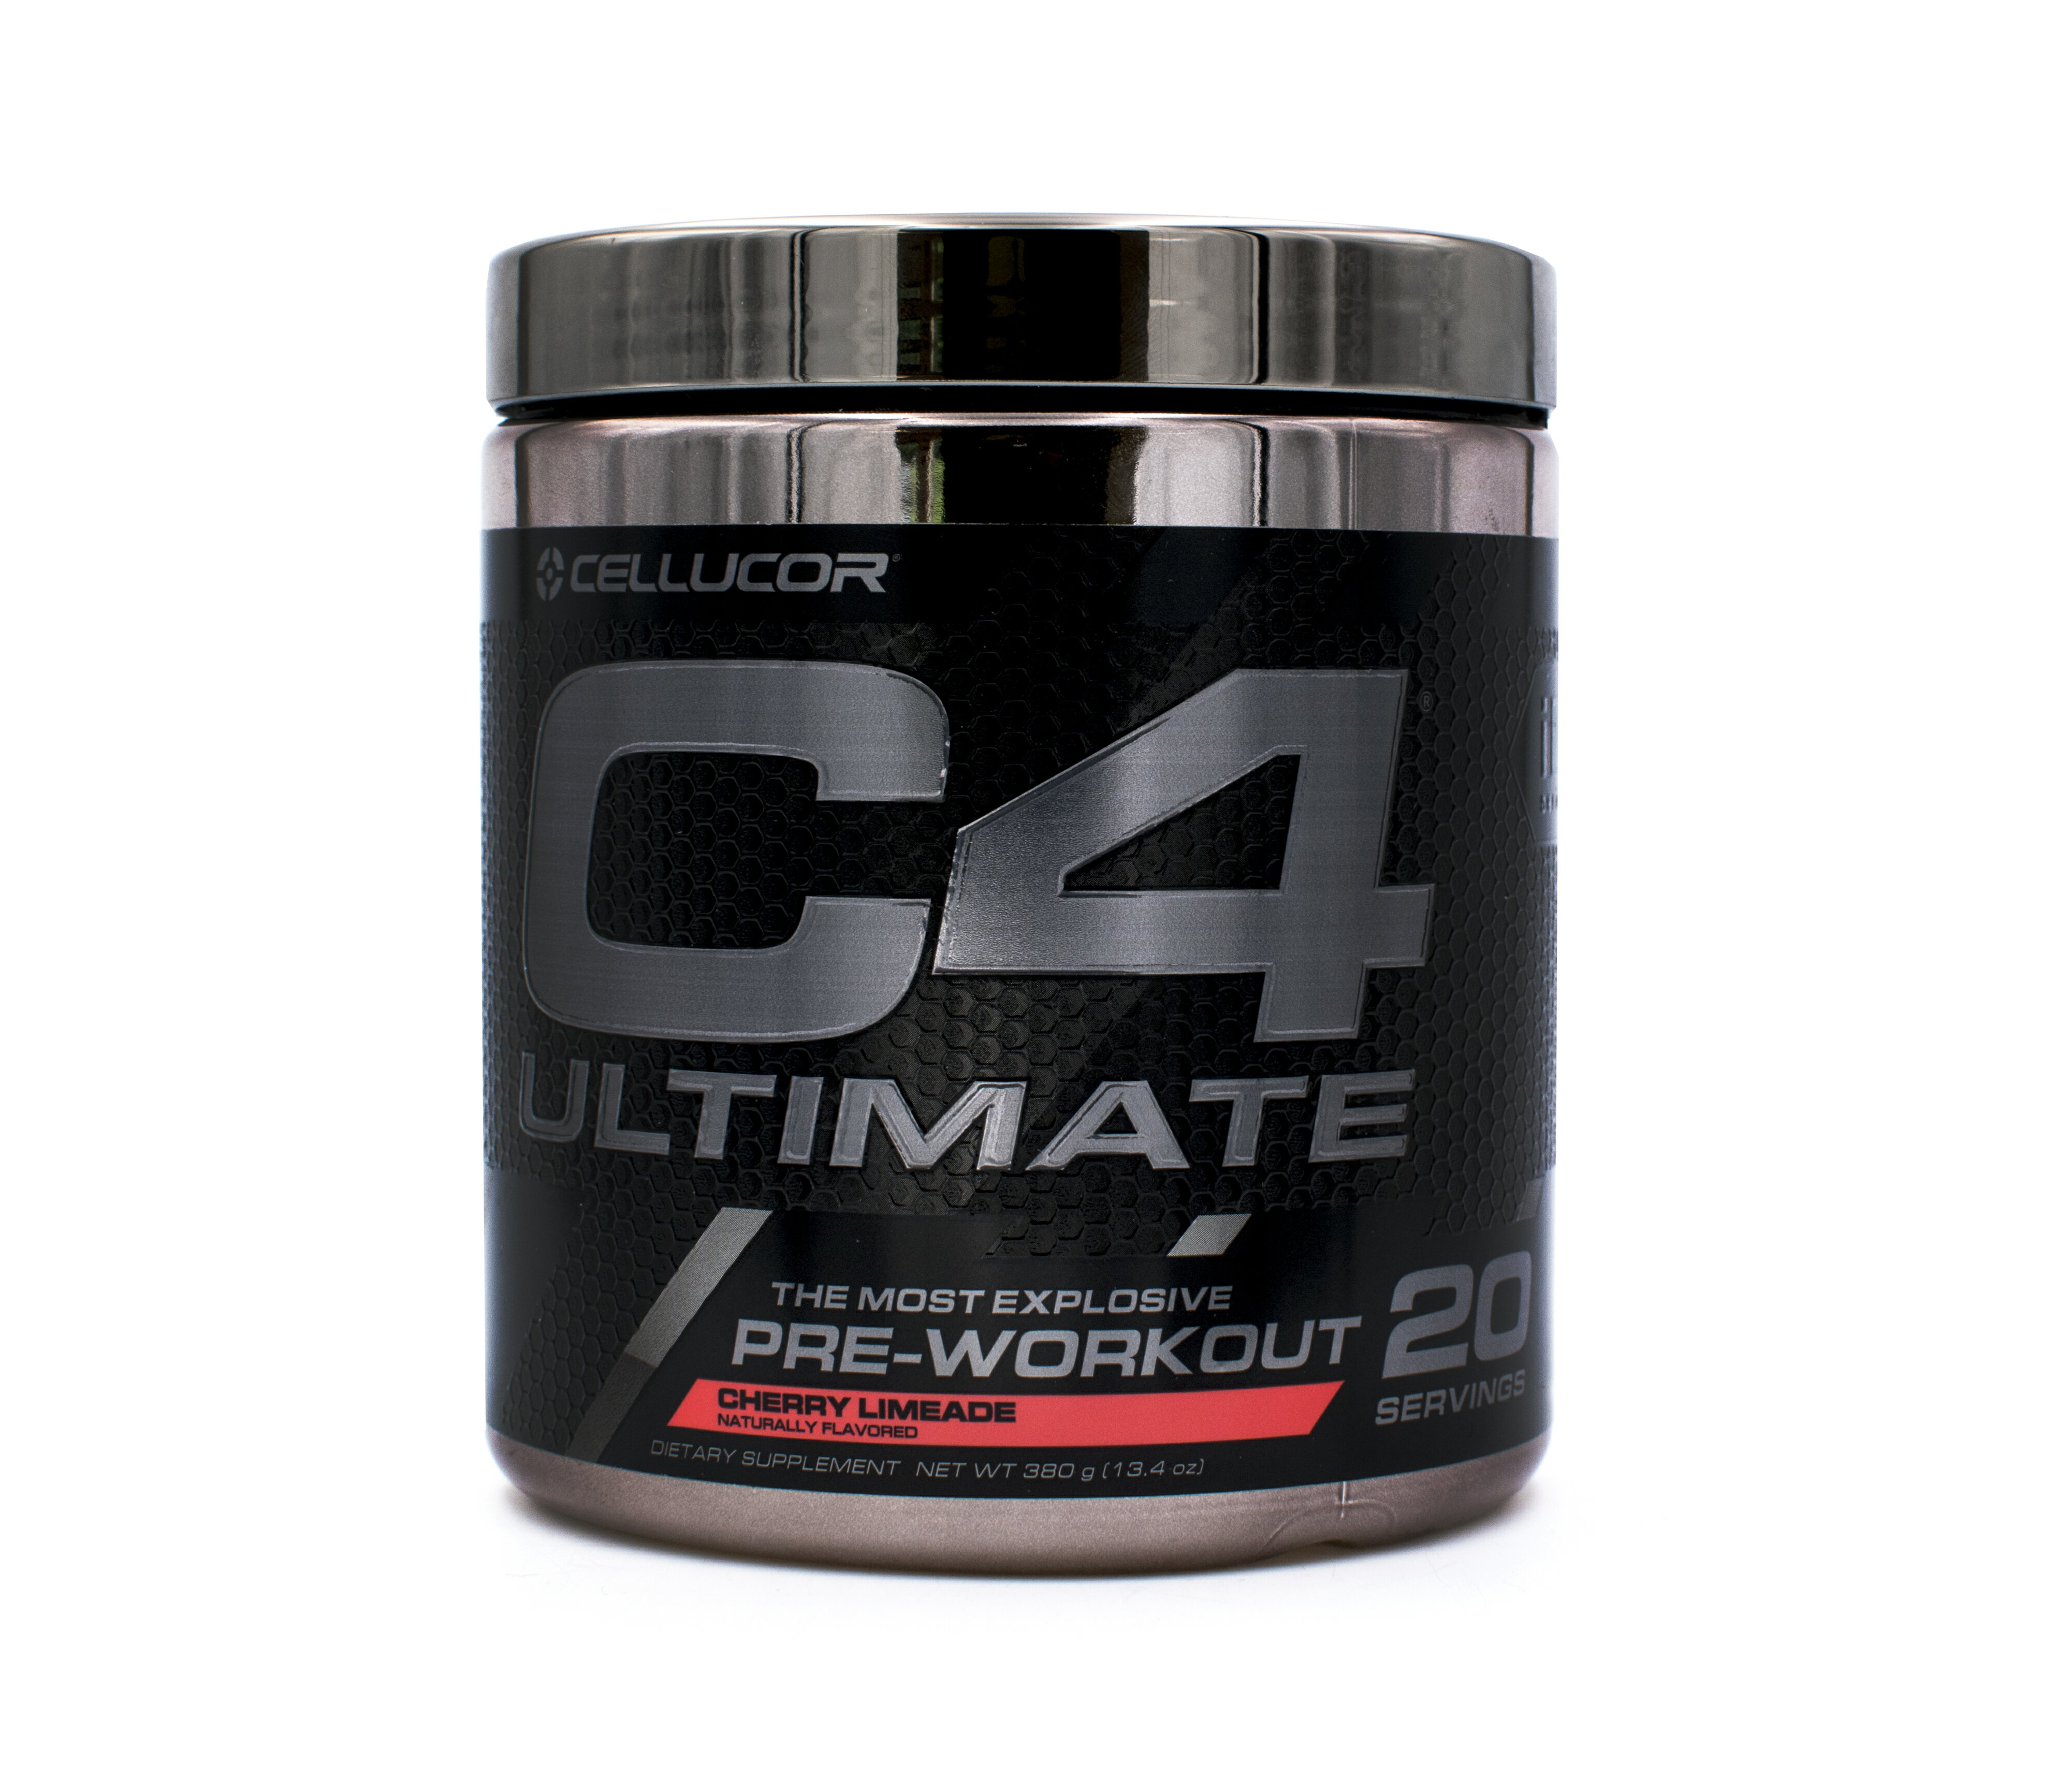 Cellucor C4 Ultimate Pre Workout Build Muscle Energy And Endurance 20 Servings